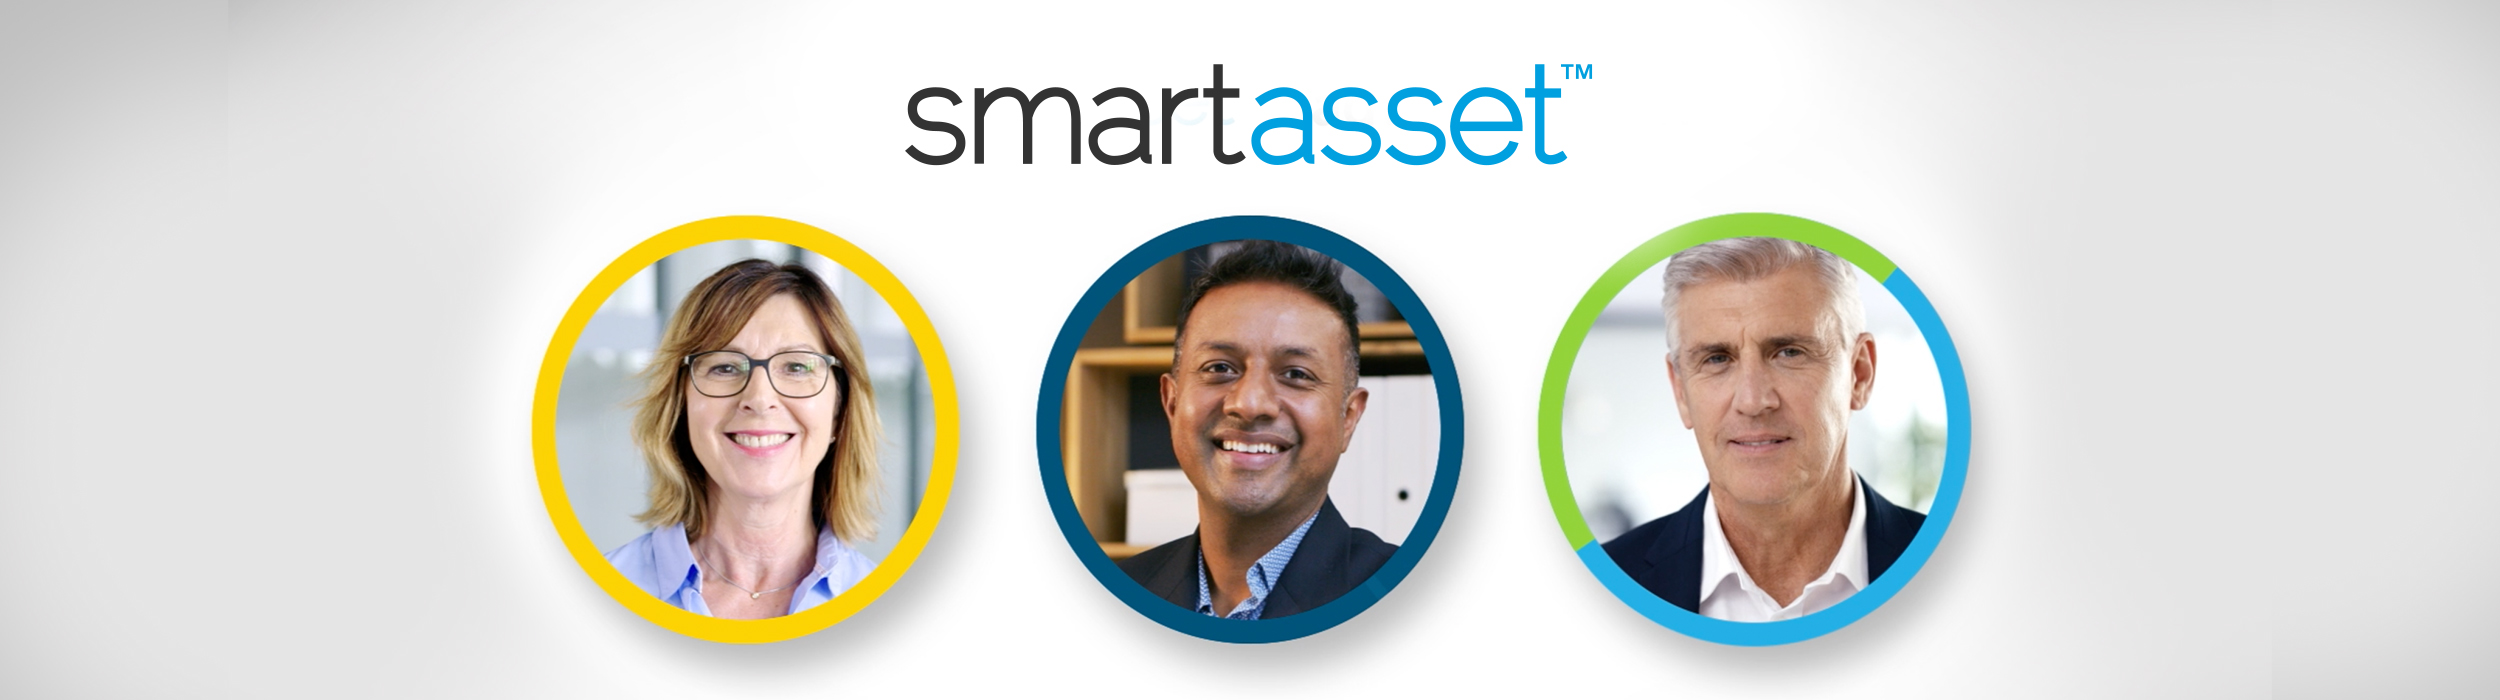 SmartAsset Launches Retirement TV Campaign with Marketing Architects